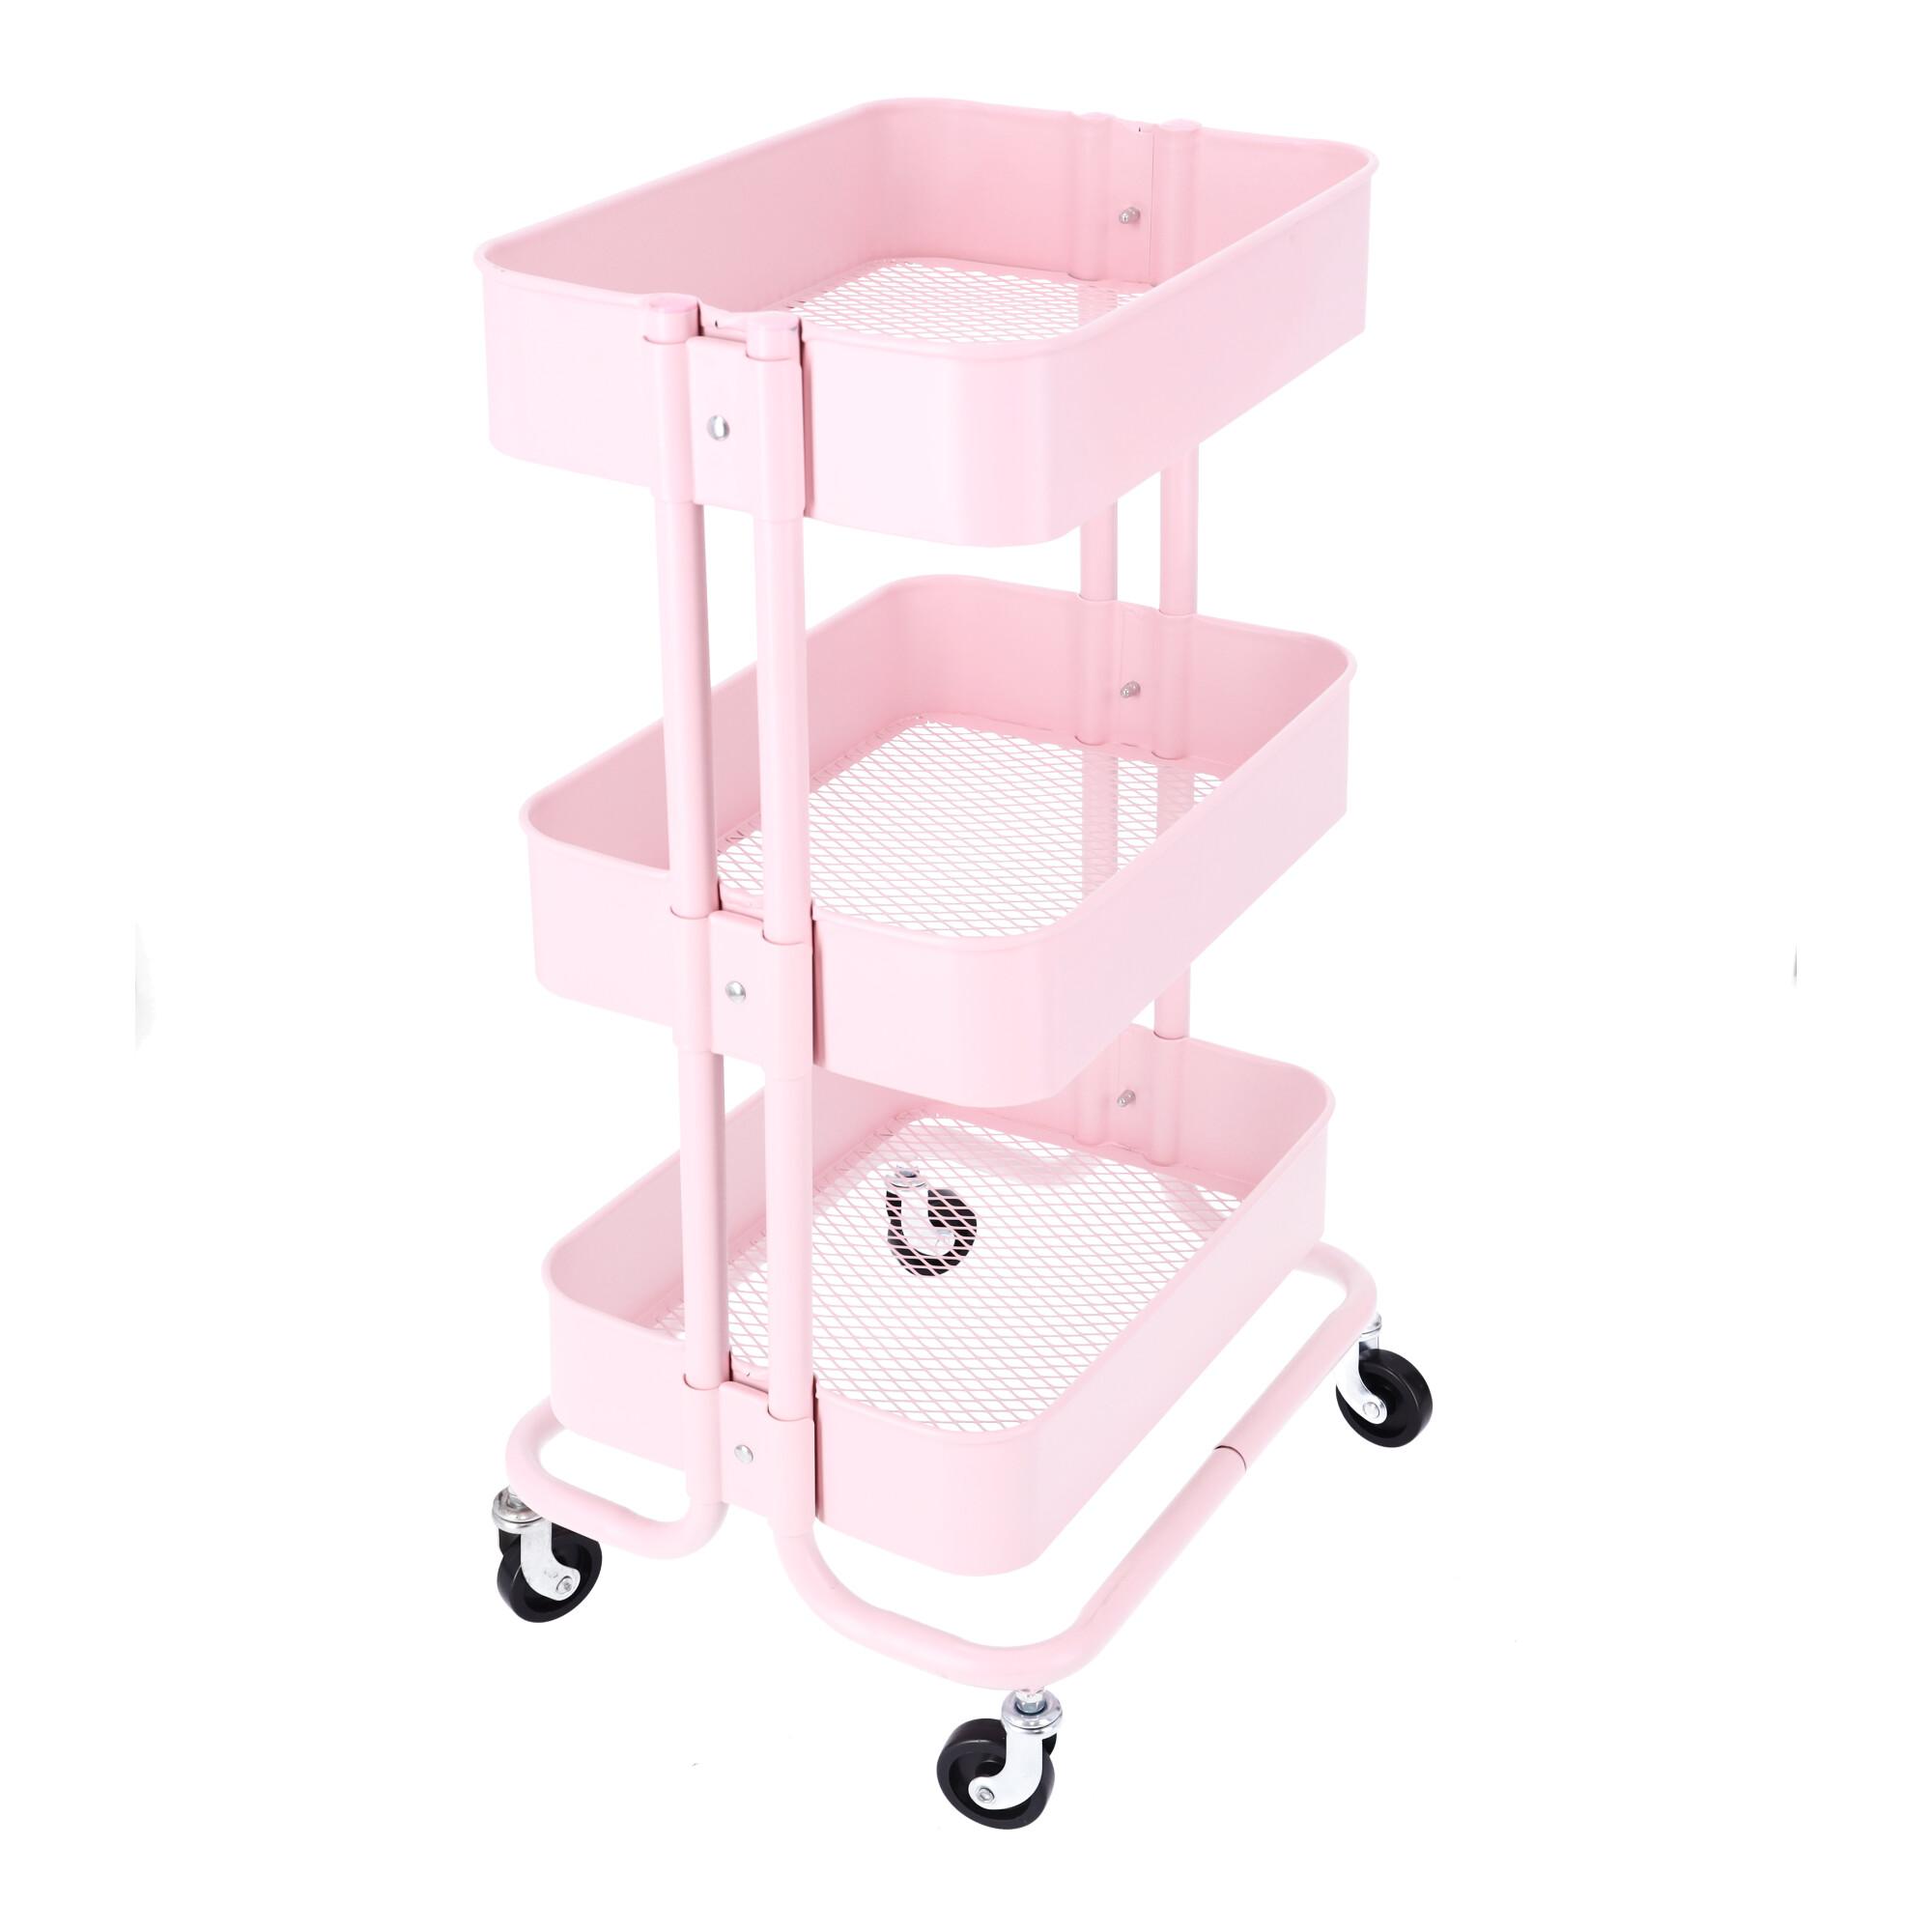 Multifunctional cabinet on wheels with three capacious shelves - pink